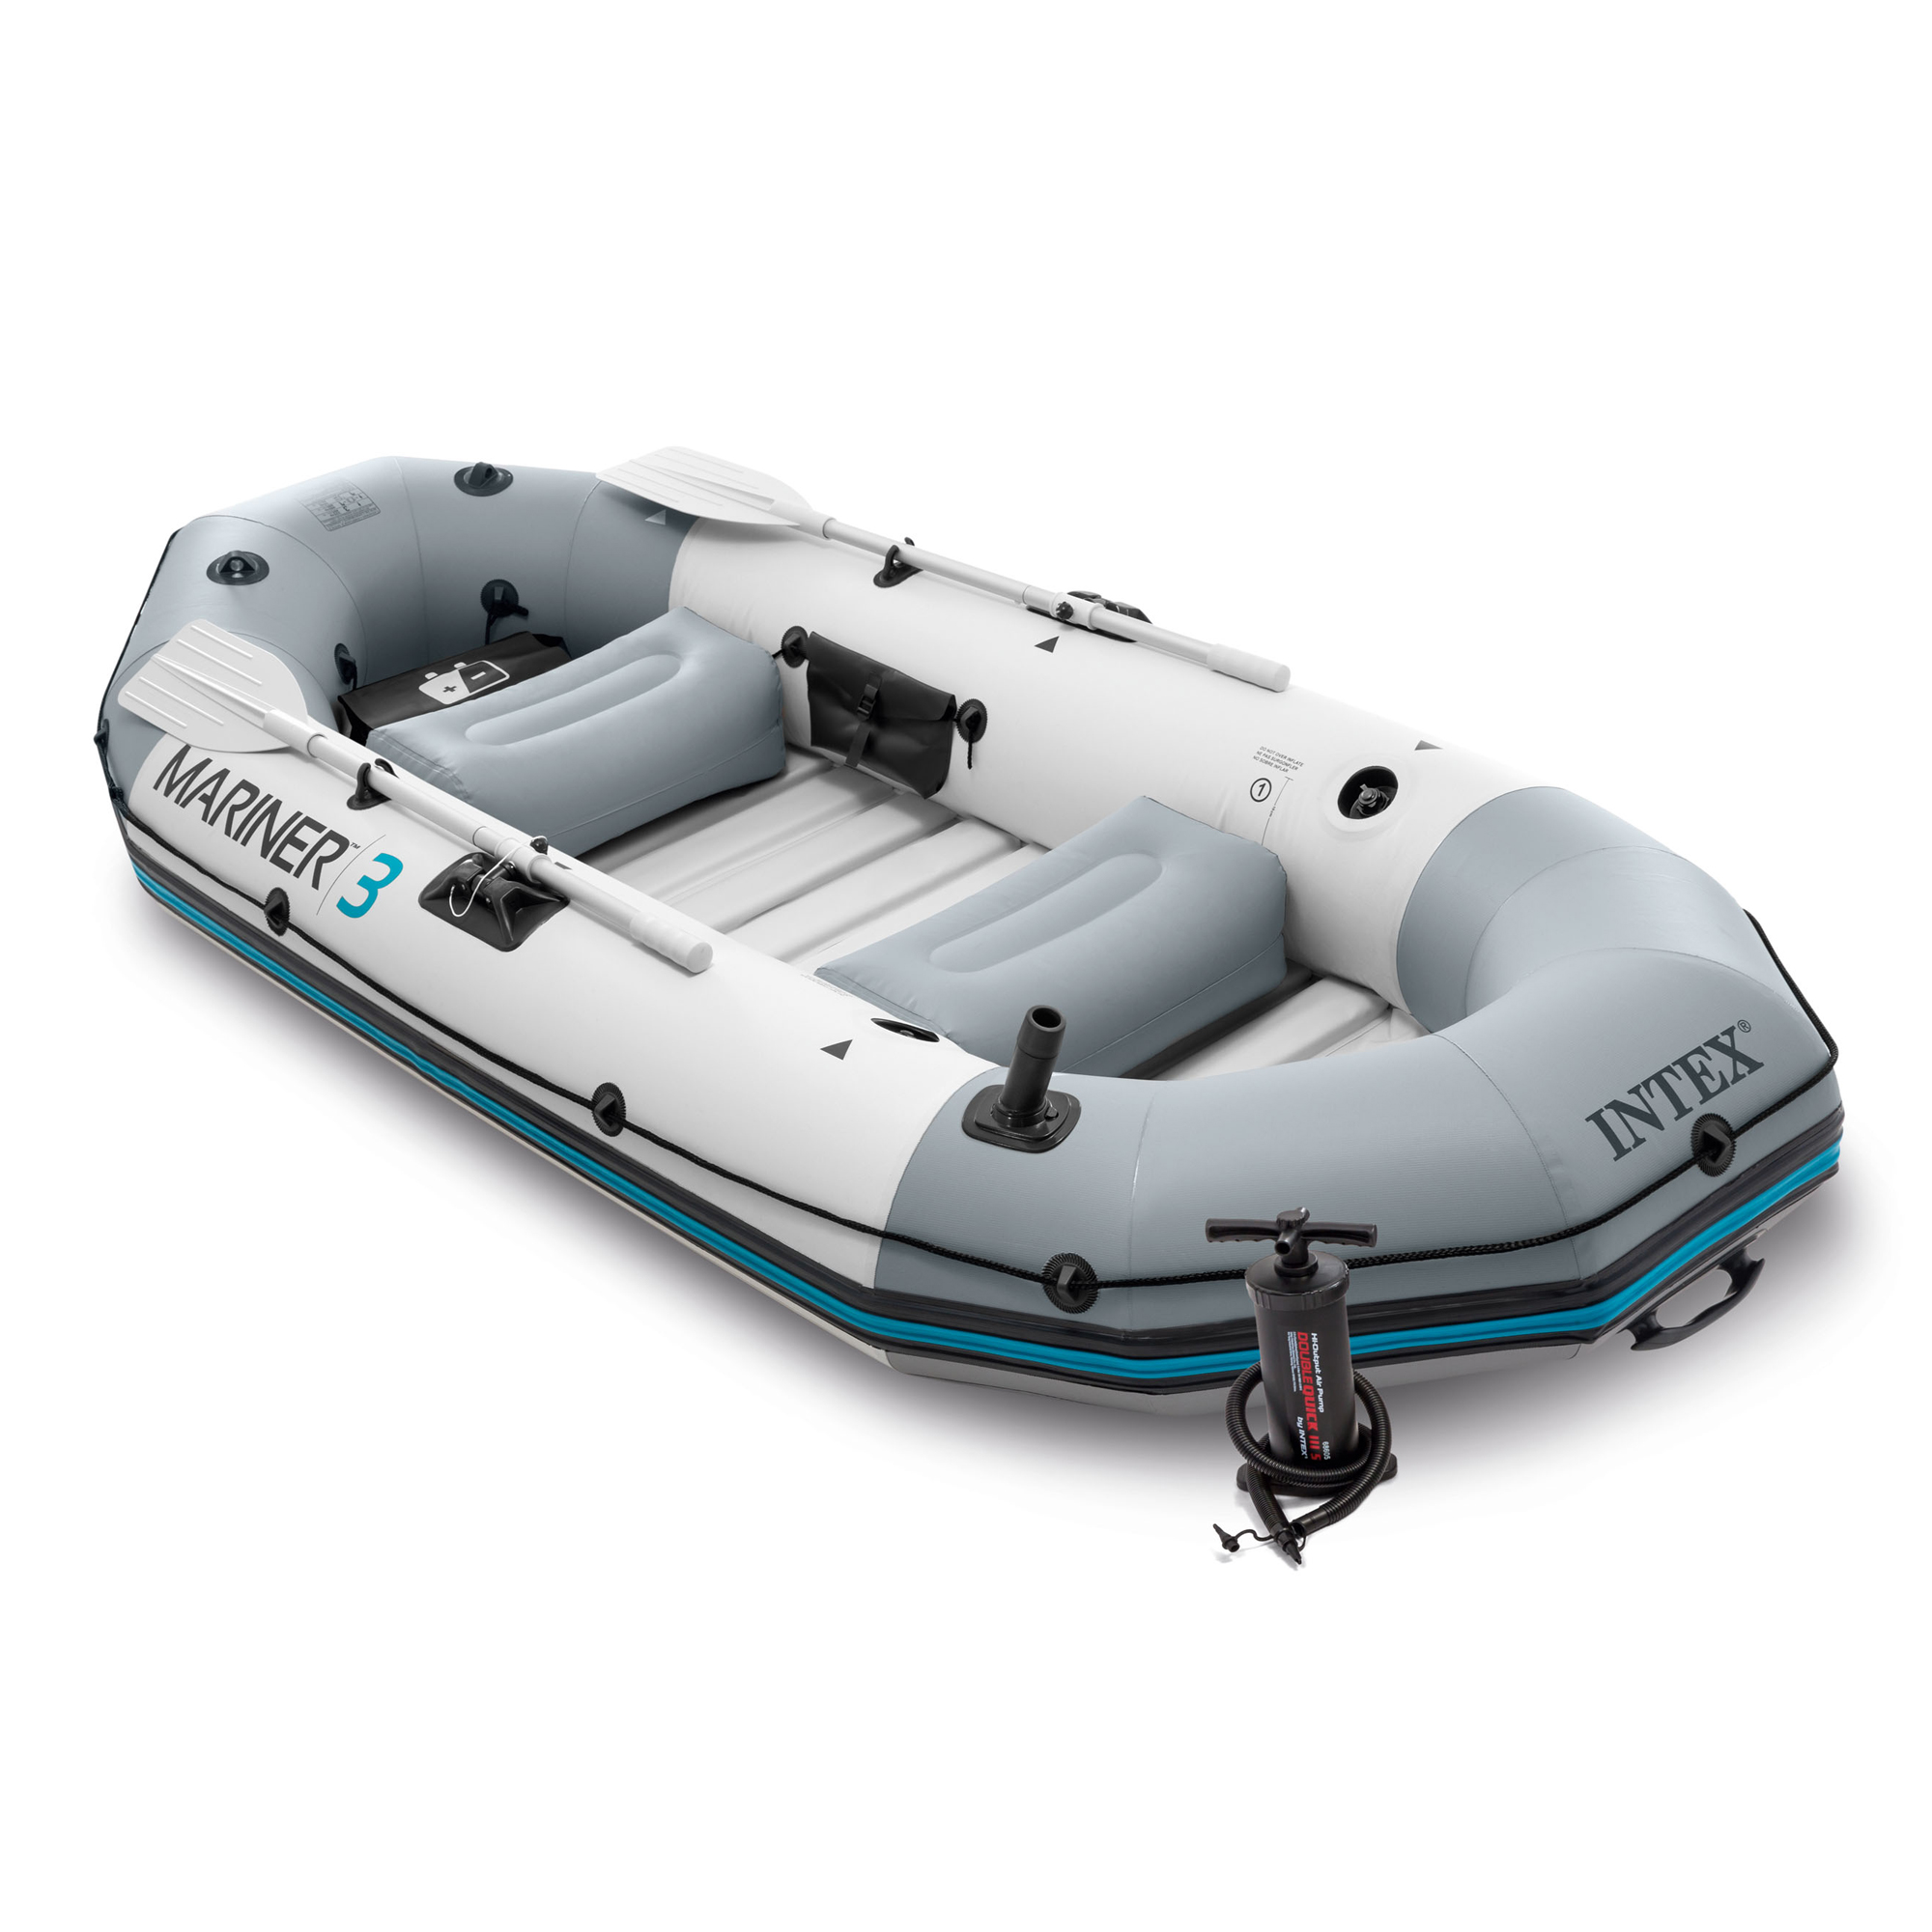 Intex Mariner 3, 3-Person Inflatable River/Lake Dinghy Boat & Oars Set - image 1 of 12